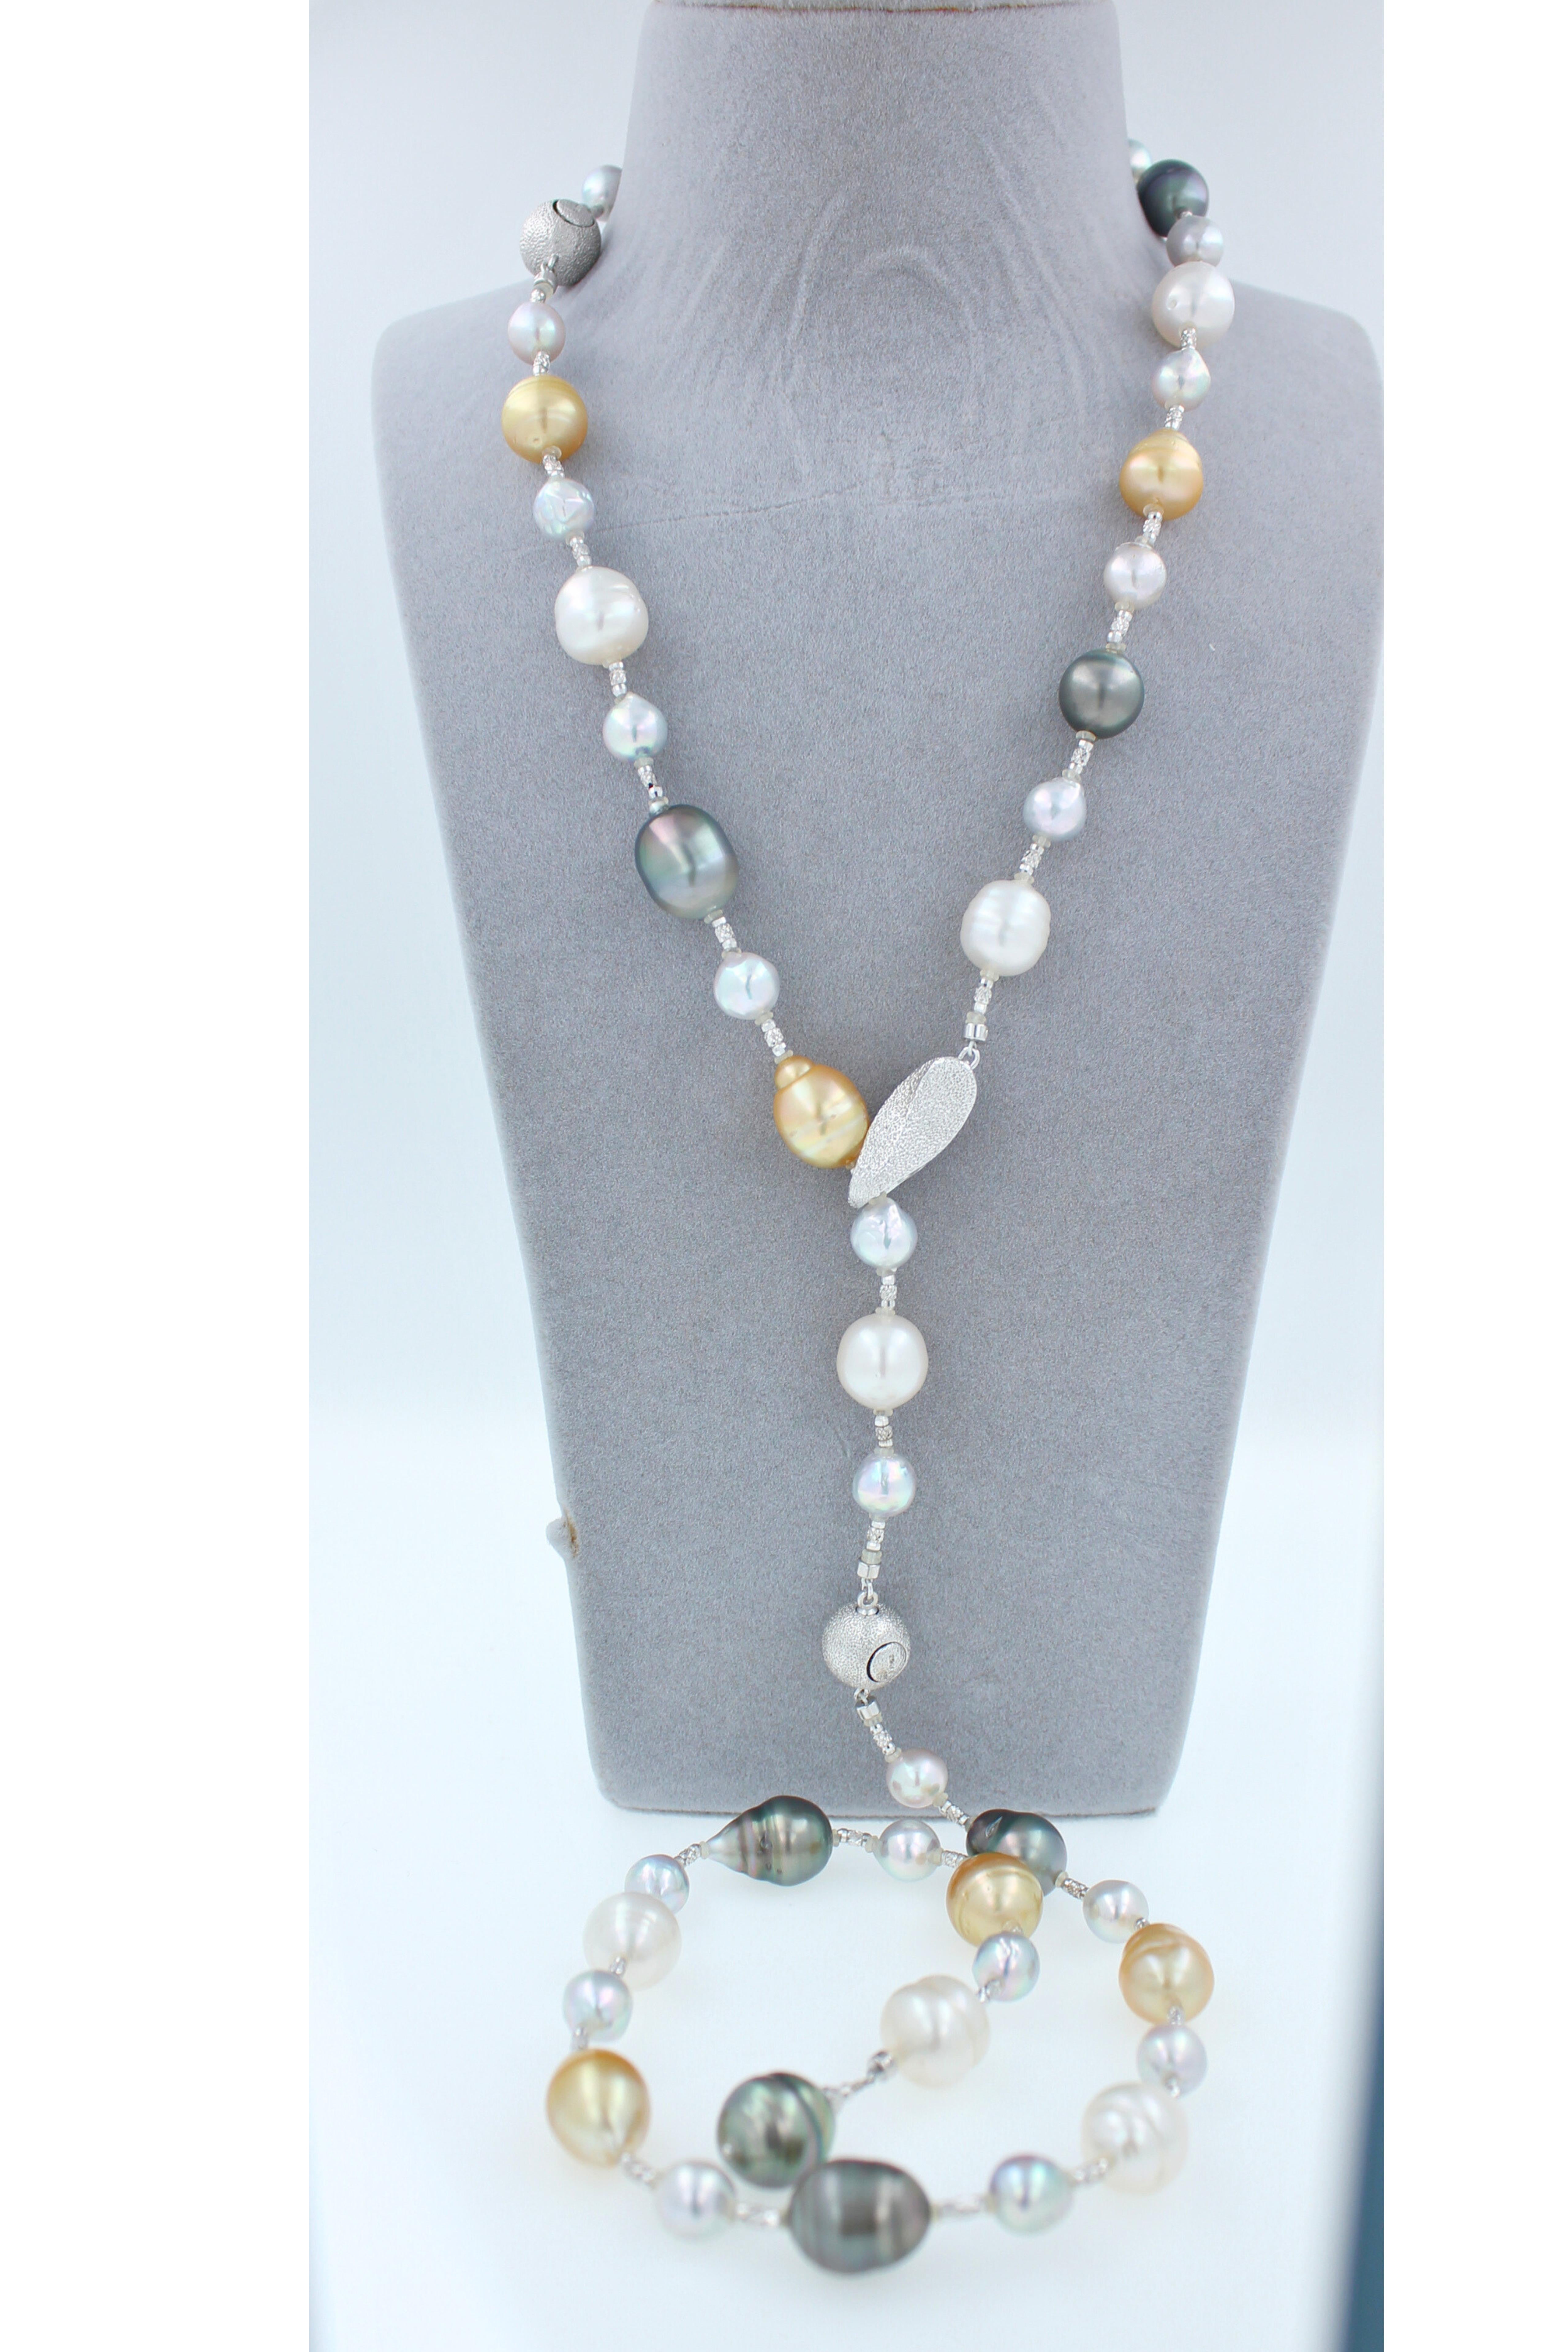 Yellow White South Sea Tahitian Pearls Gold Adjustable Lariat Necklace Bracelet In New Condition For Sale In Oakton, VA